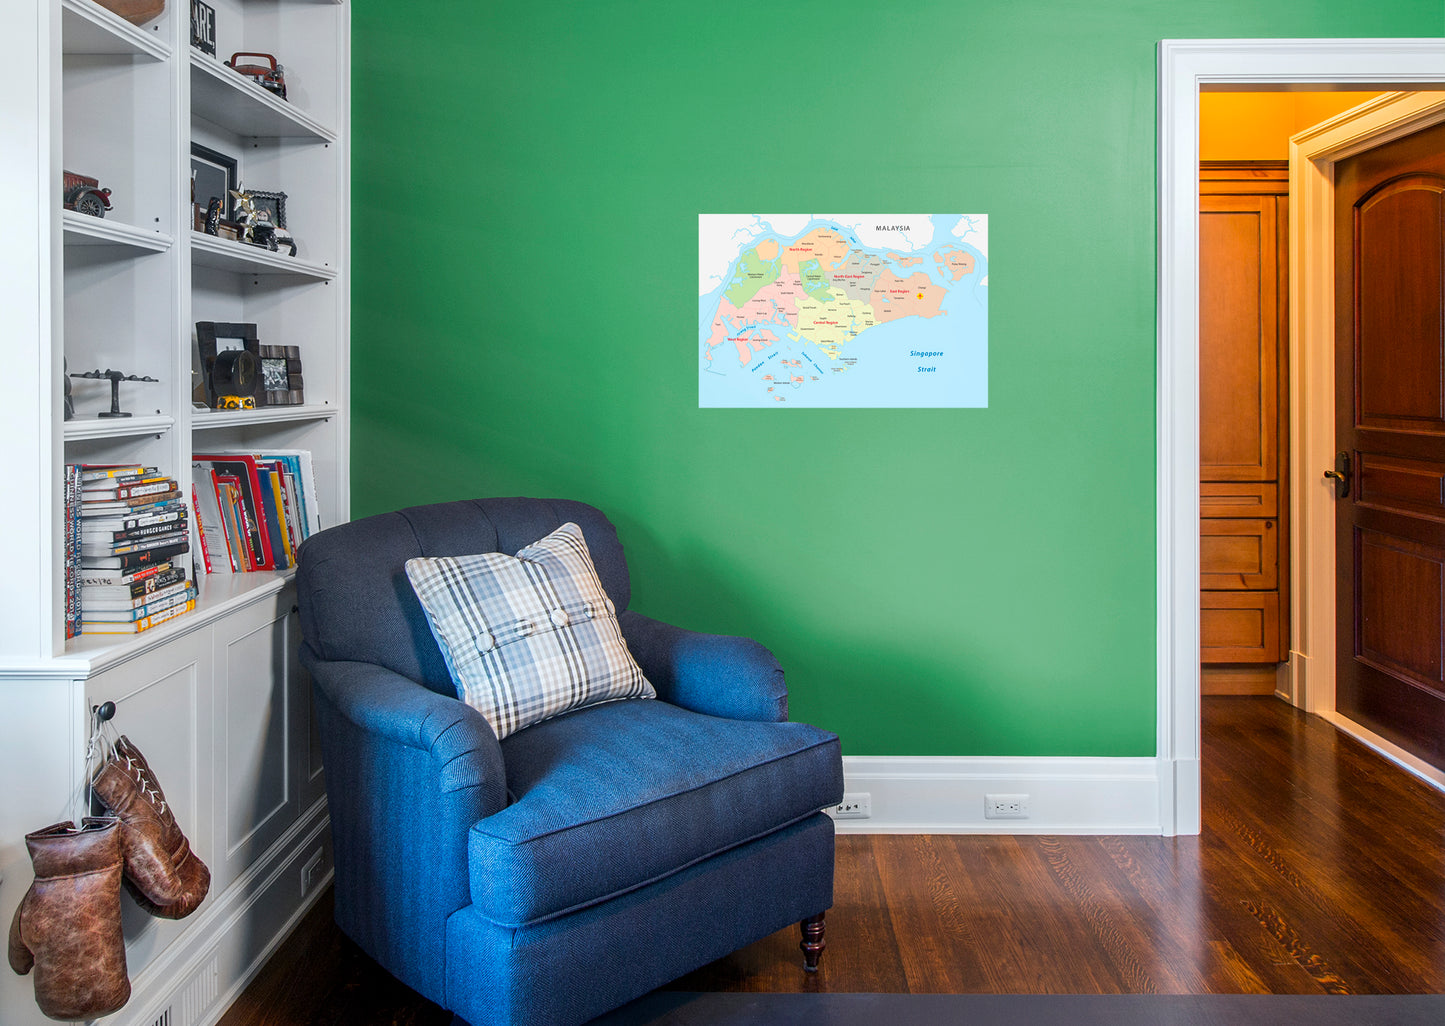 Maps of Asia: Singapore Mural        -   Removable Wall   Adhesive Decal